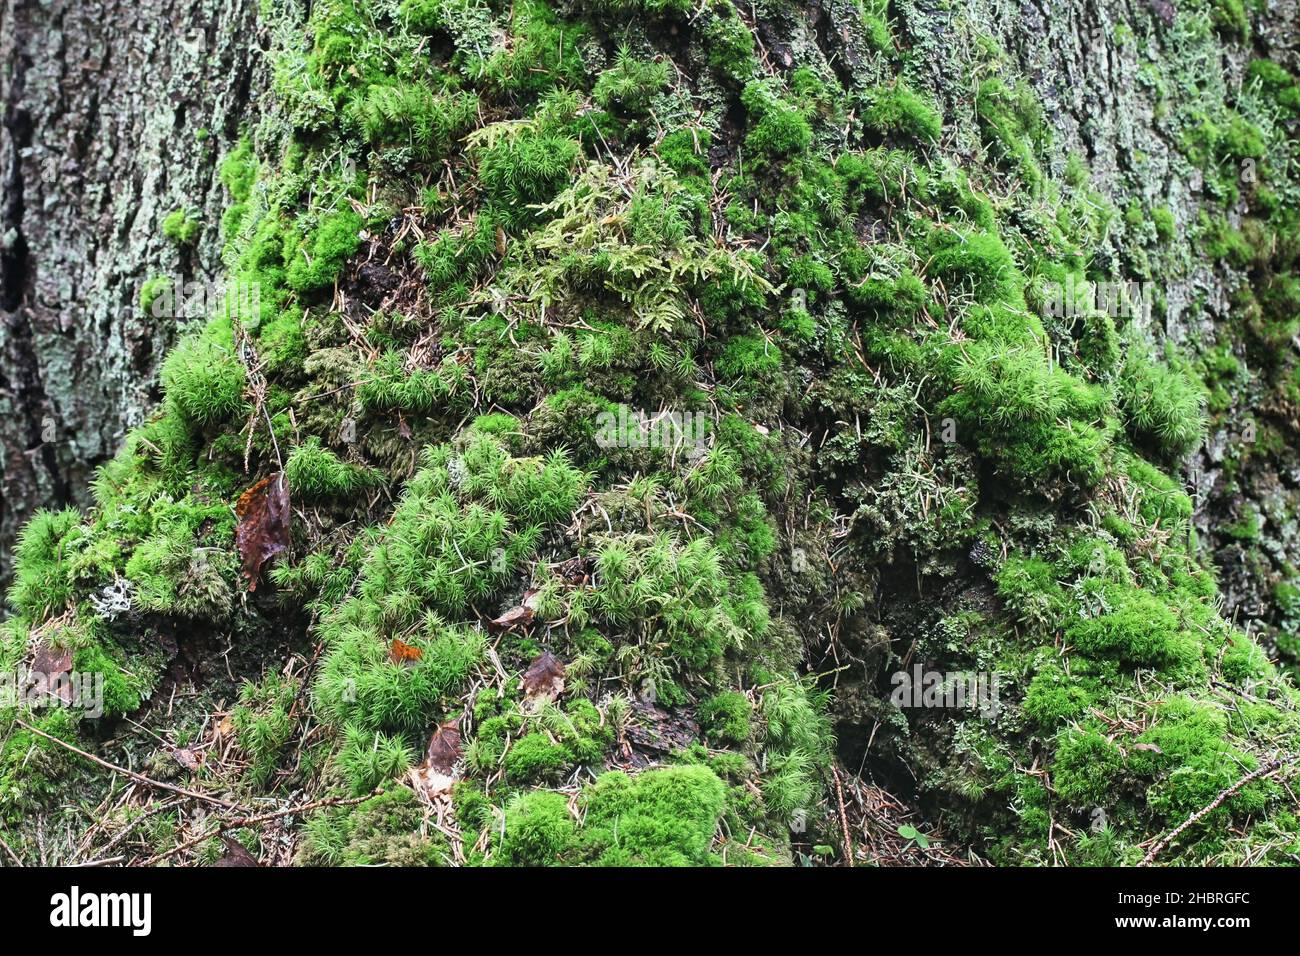 Moss-covered trunk and roots of Norway spruce, old forest in natural state Stock Photo